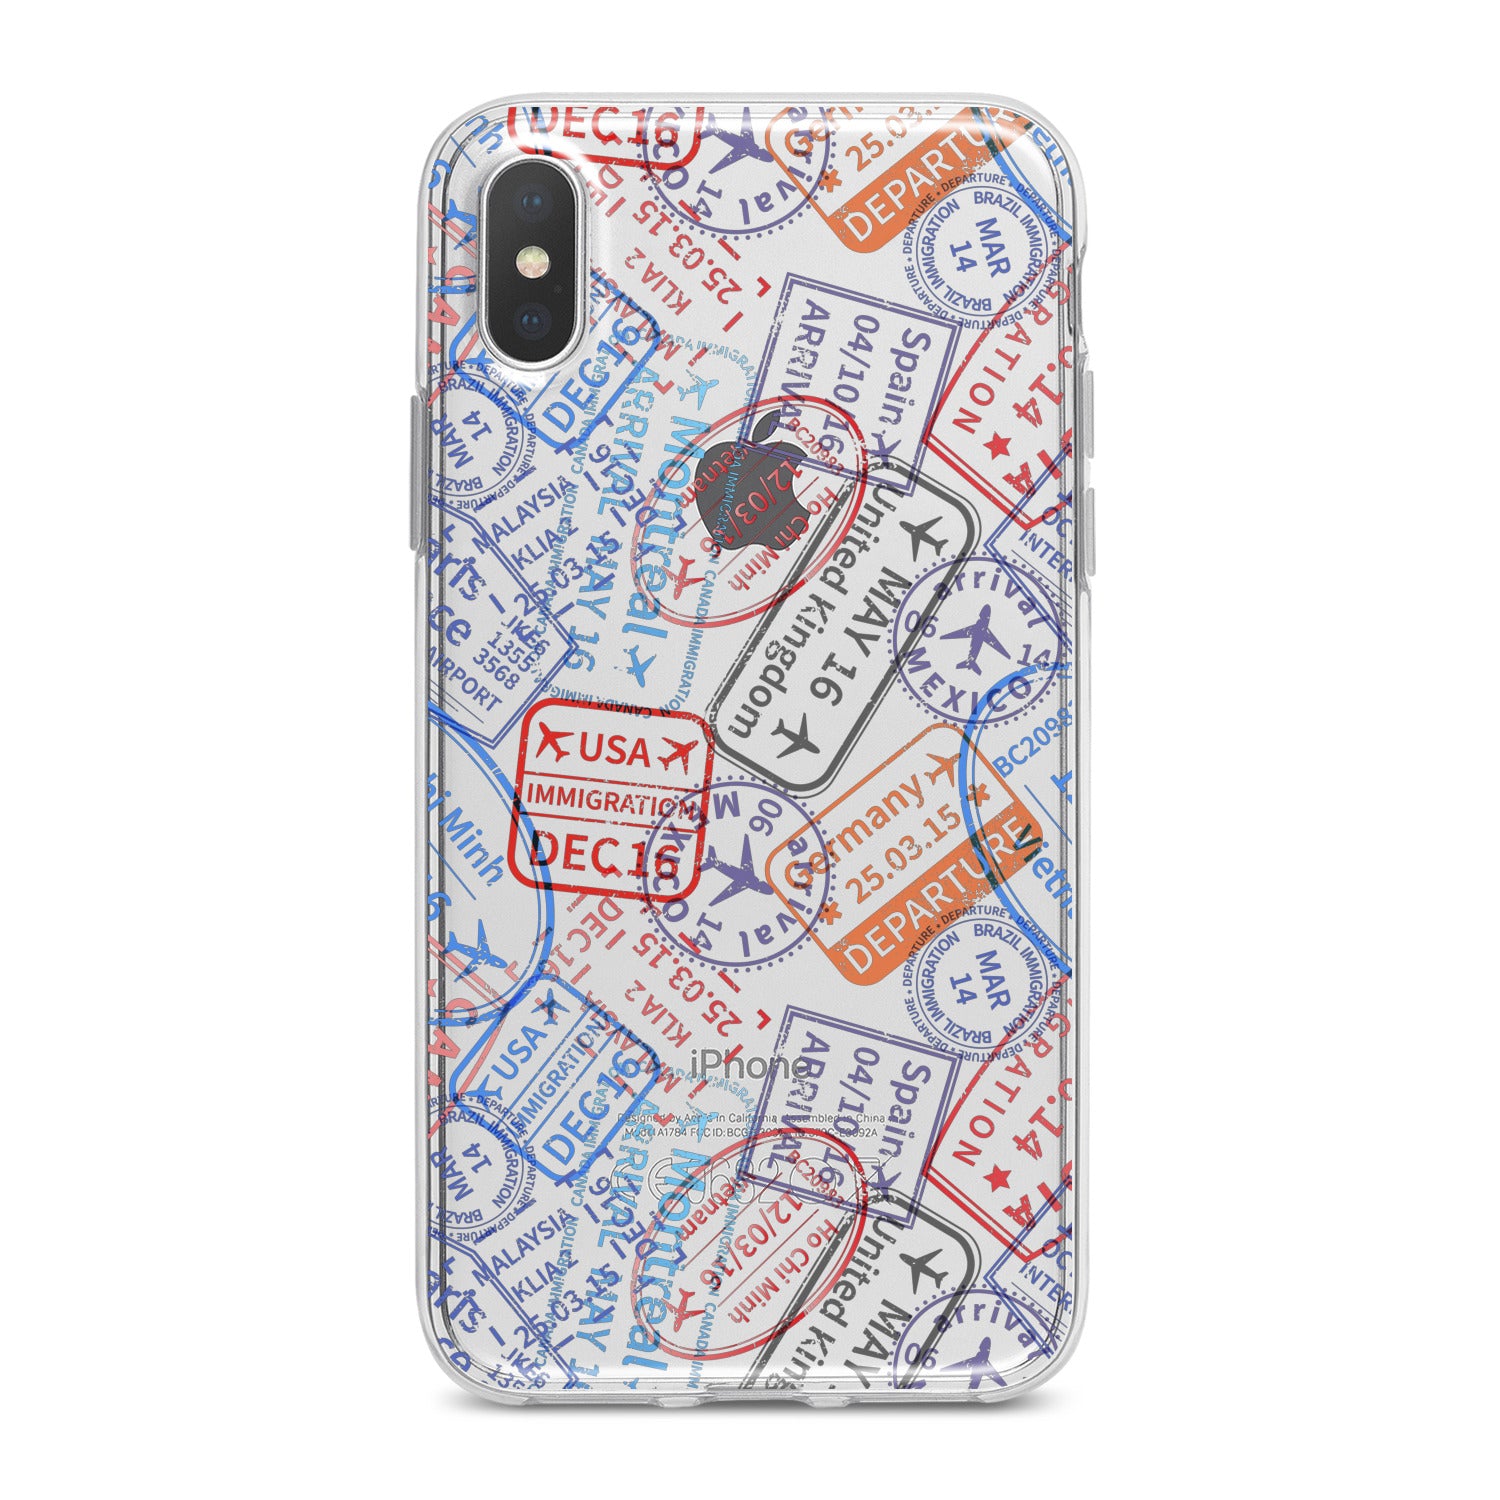 Lex Altern Travel Pattern Phone Case for your iPhone & Android phone.